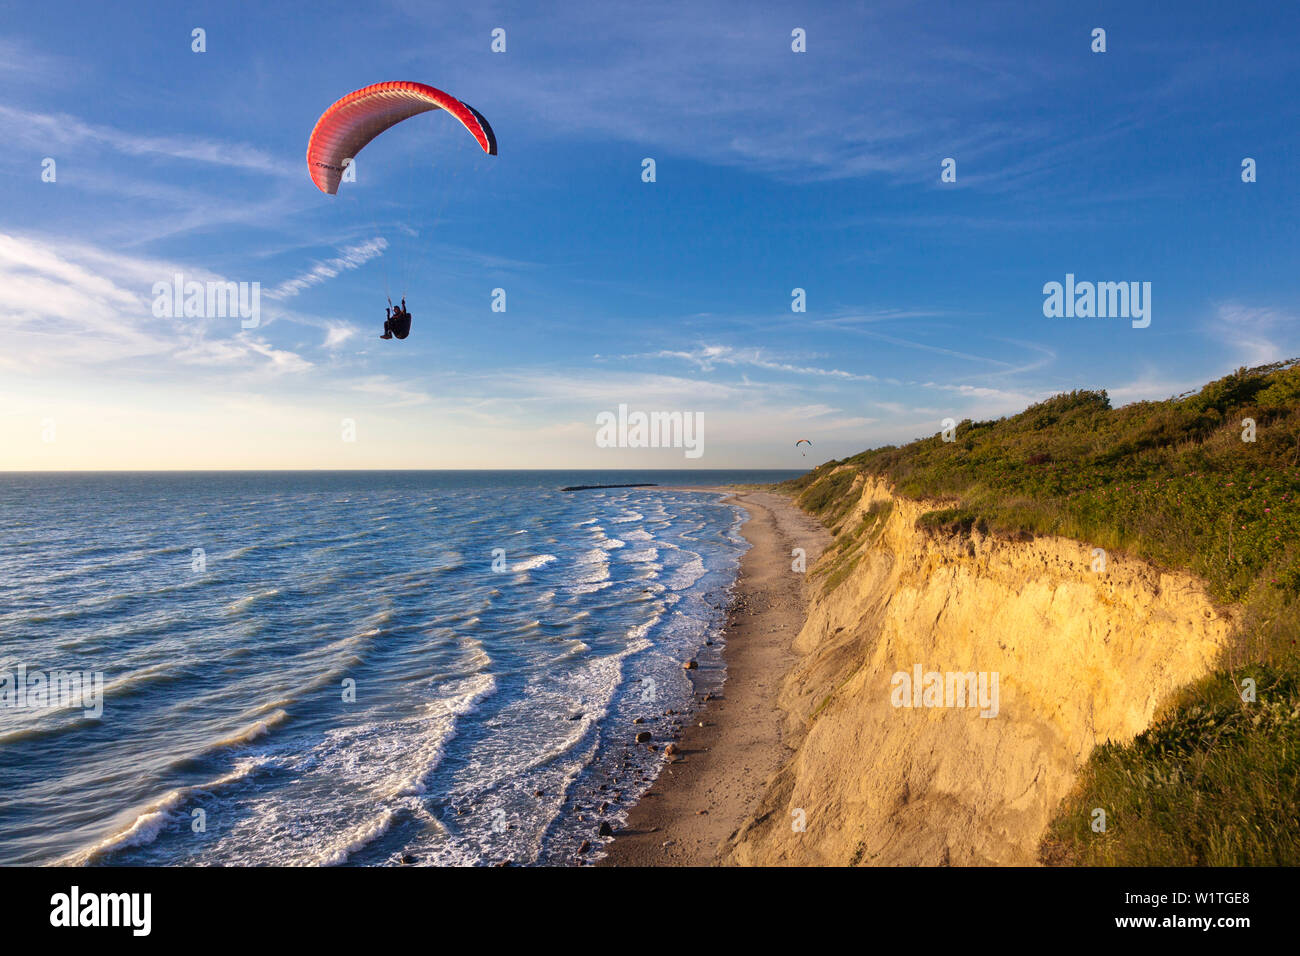 Paraglider at Hohes Ufer near Ahrenshoop, Baltic Sea, Mecklenburg-West Pomerania, Germany Stock Photo